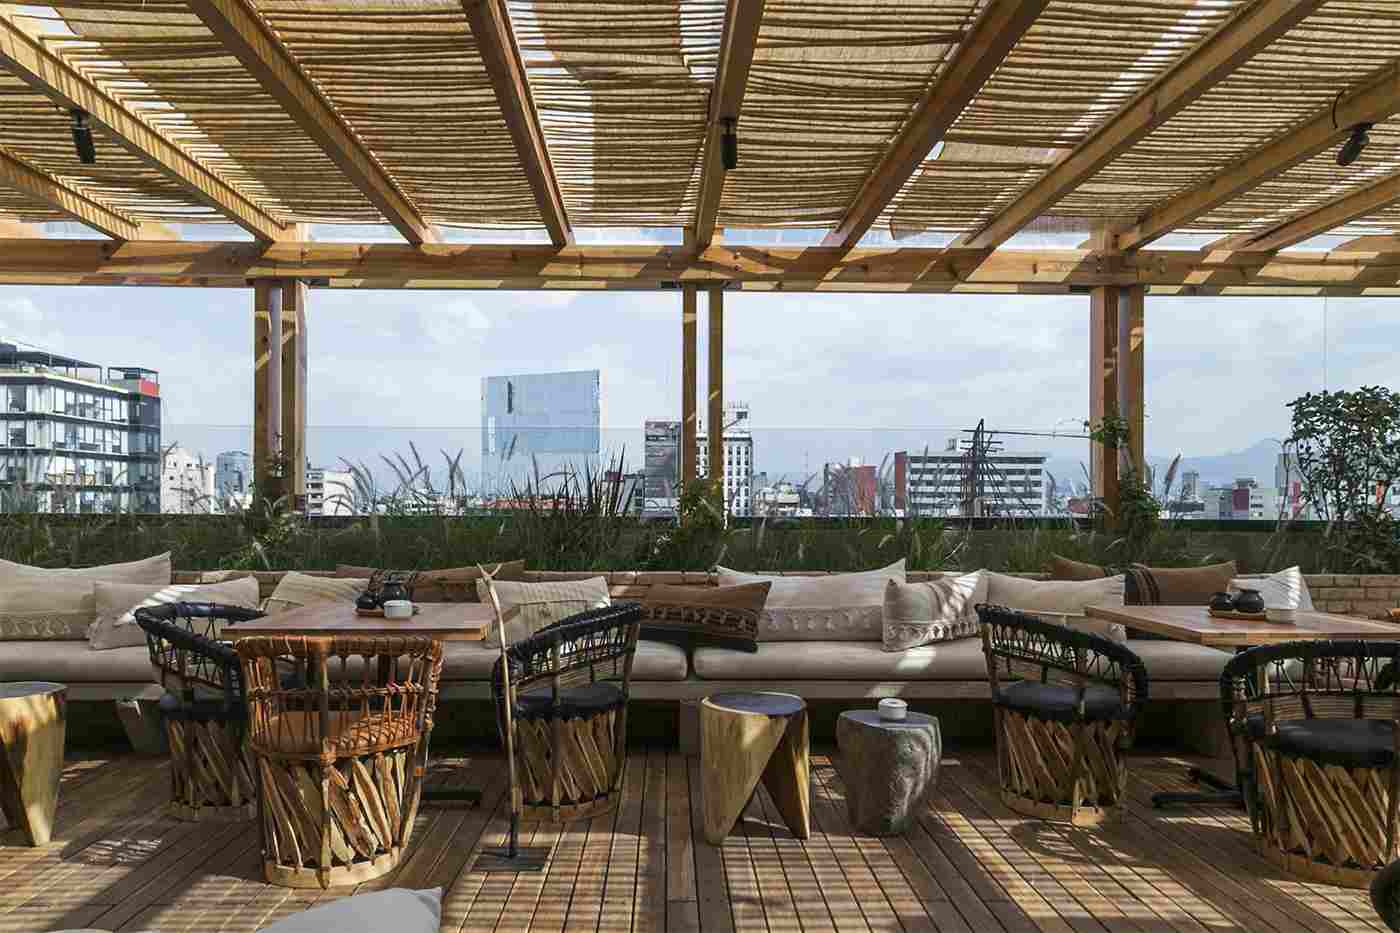 Rooftop deck chairs and wooden pergola tile floor